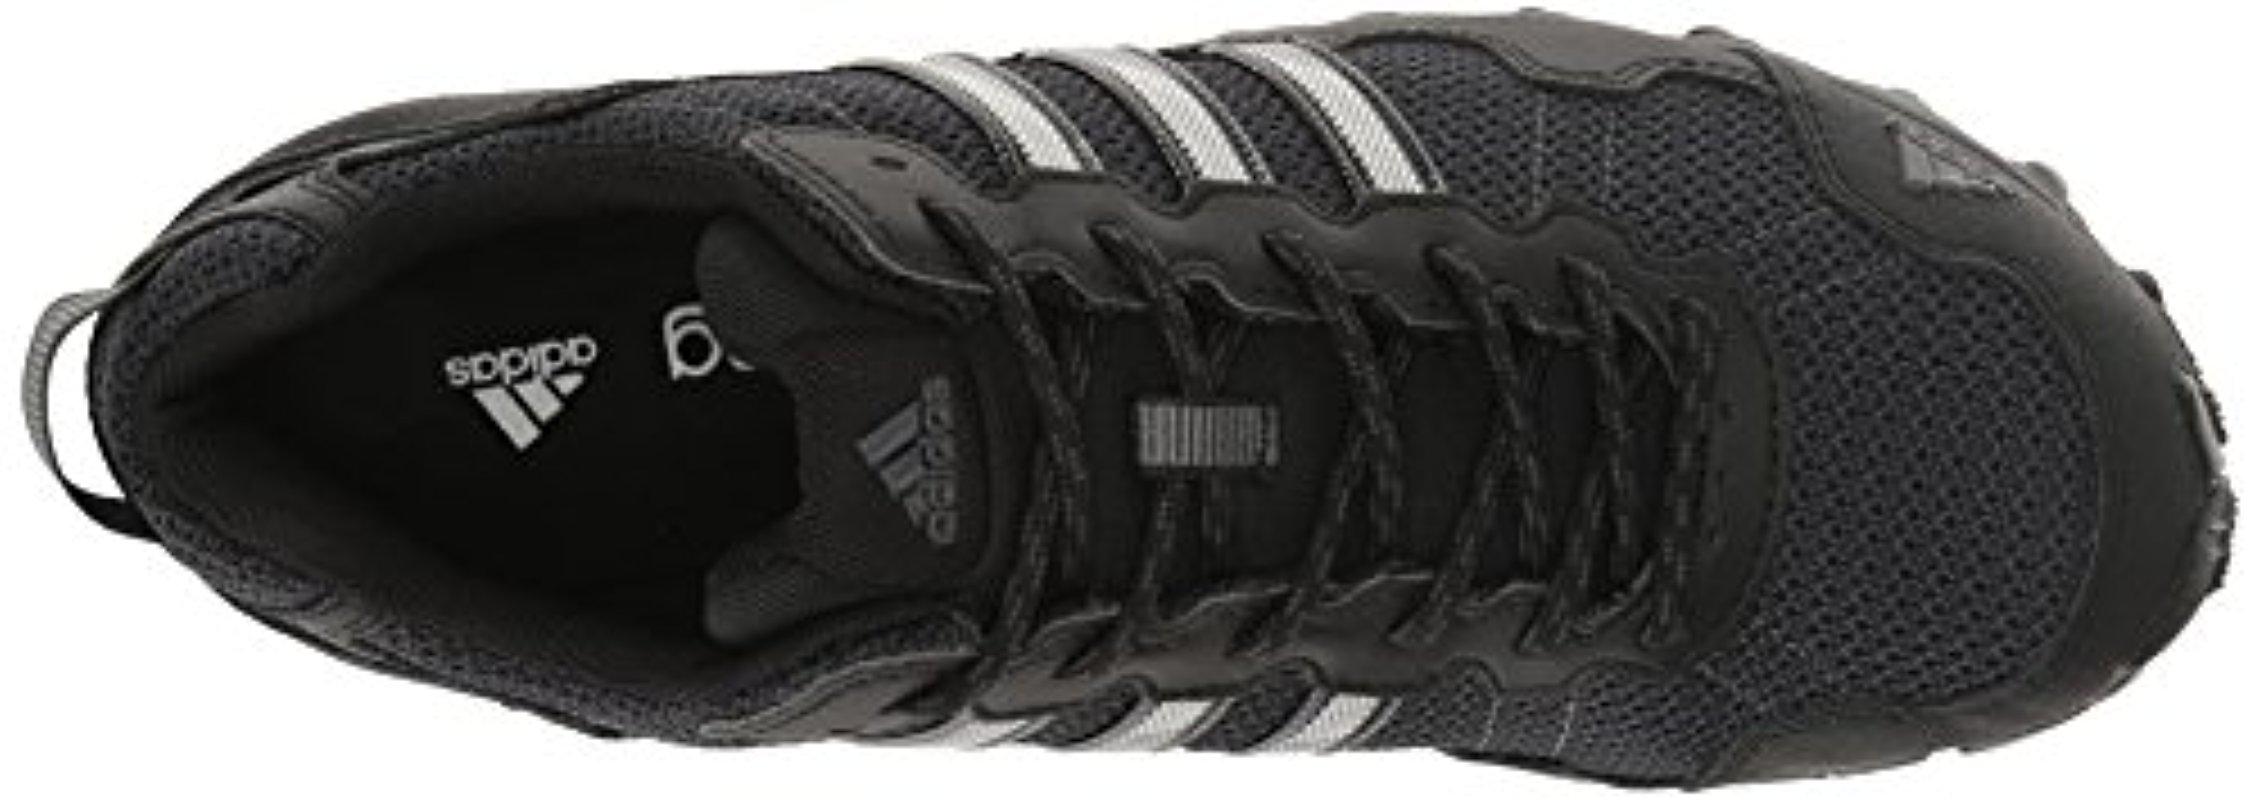 adidas Trail Running Shoe in Black for |